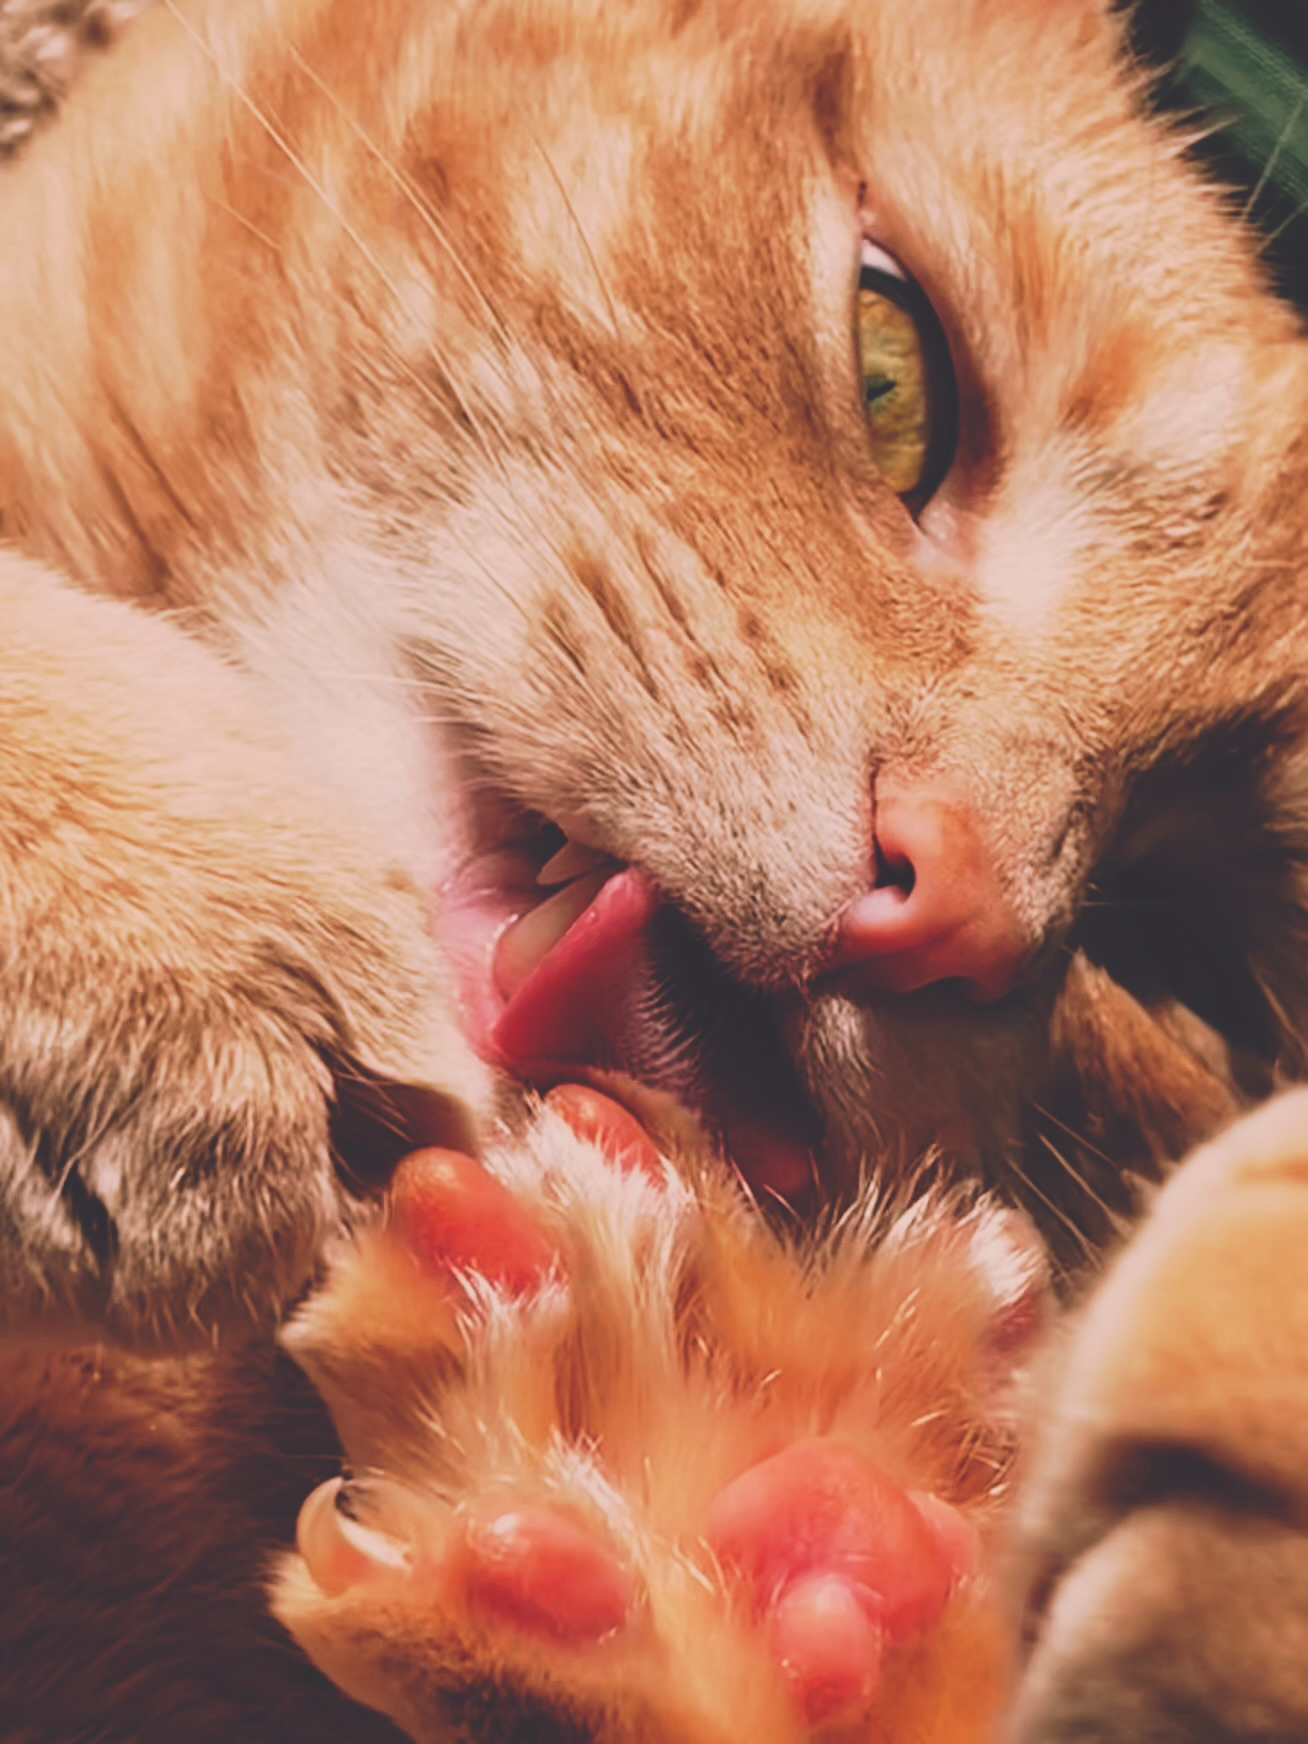 A close up of a cat grooming. His tongue is out and his toe beans are in the foreground.